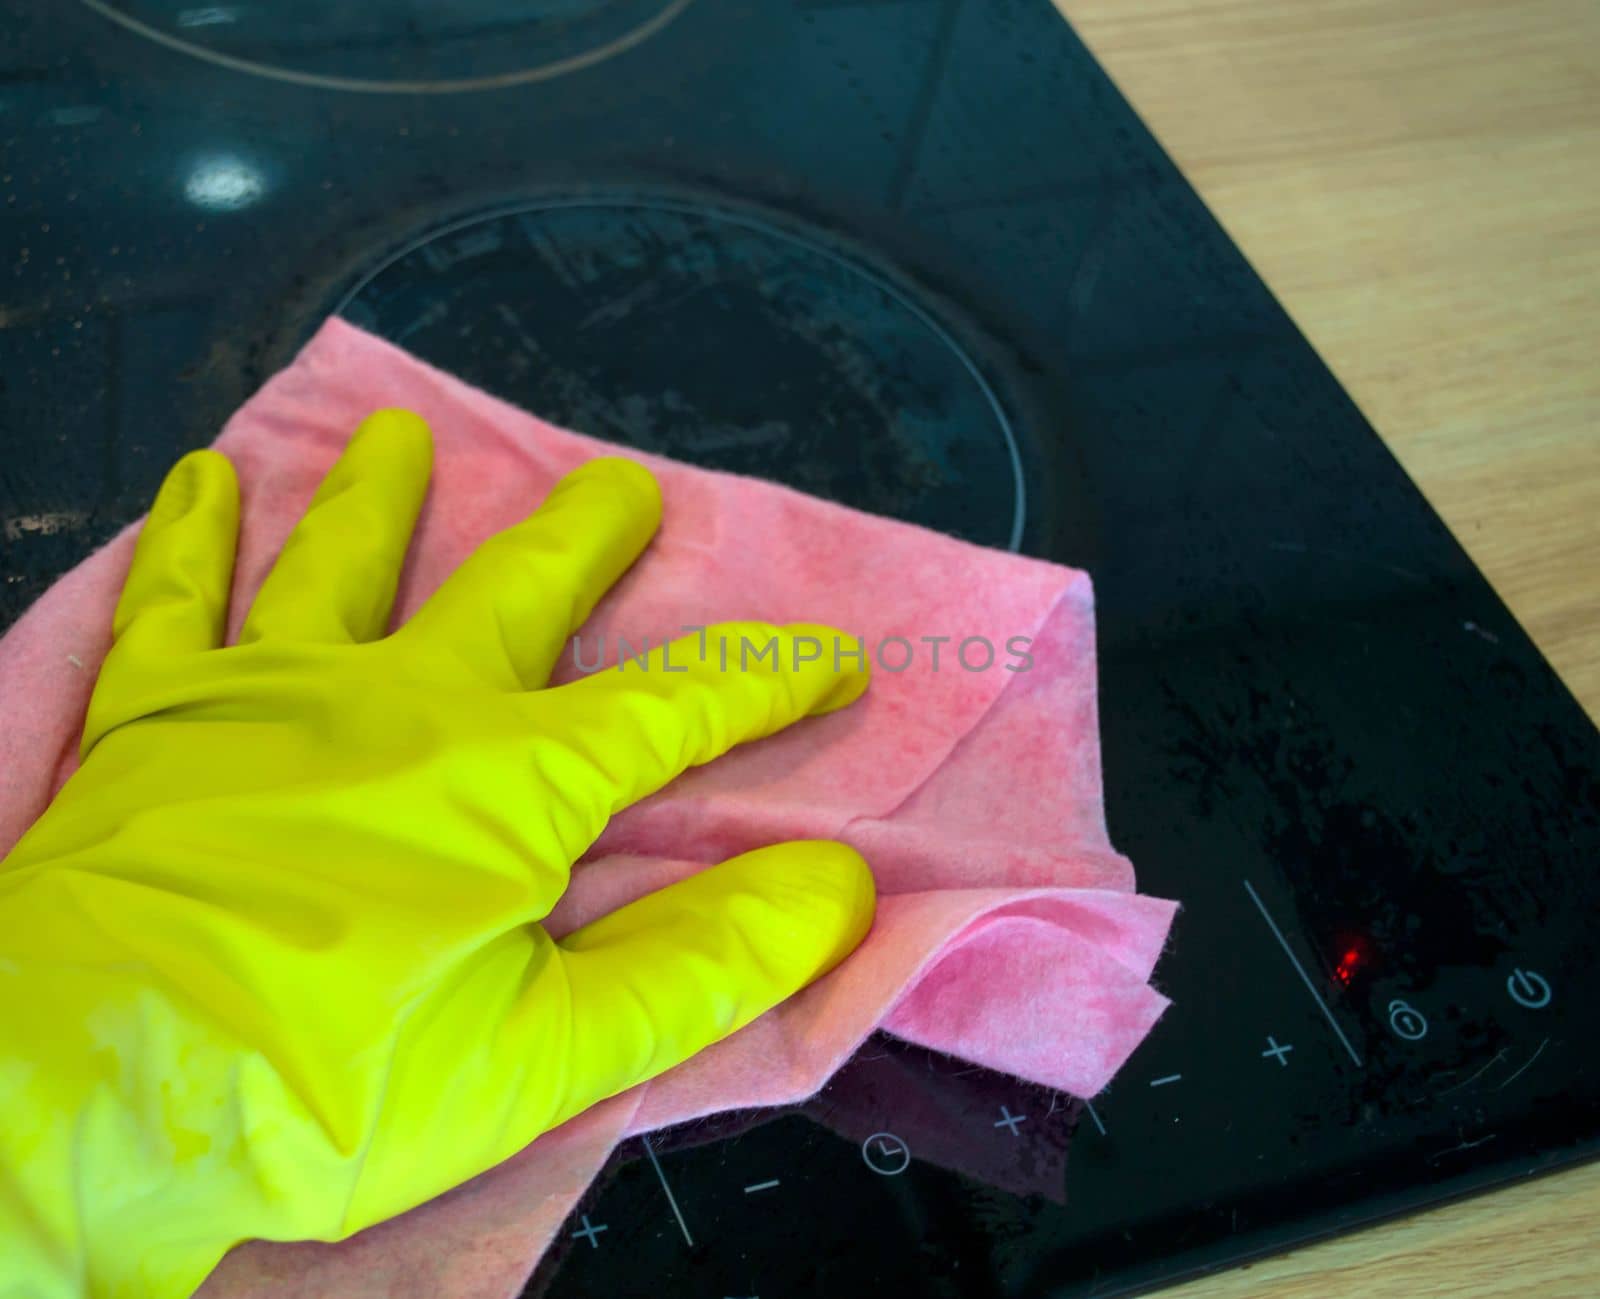 Cleaning. In the photo, a hand in a rubber glove washes a stove with a rag.